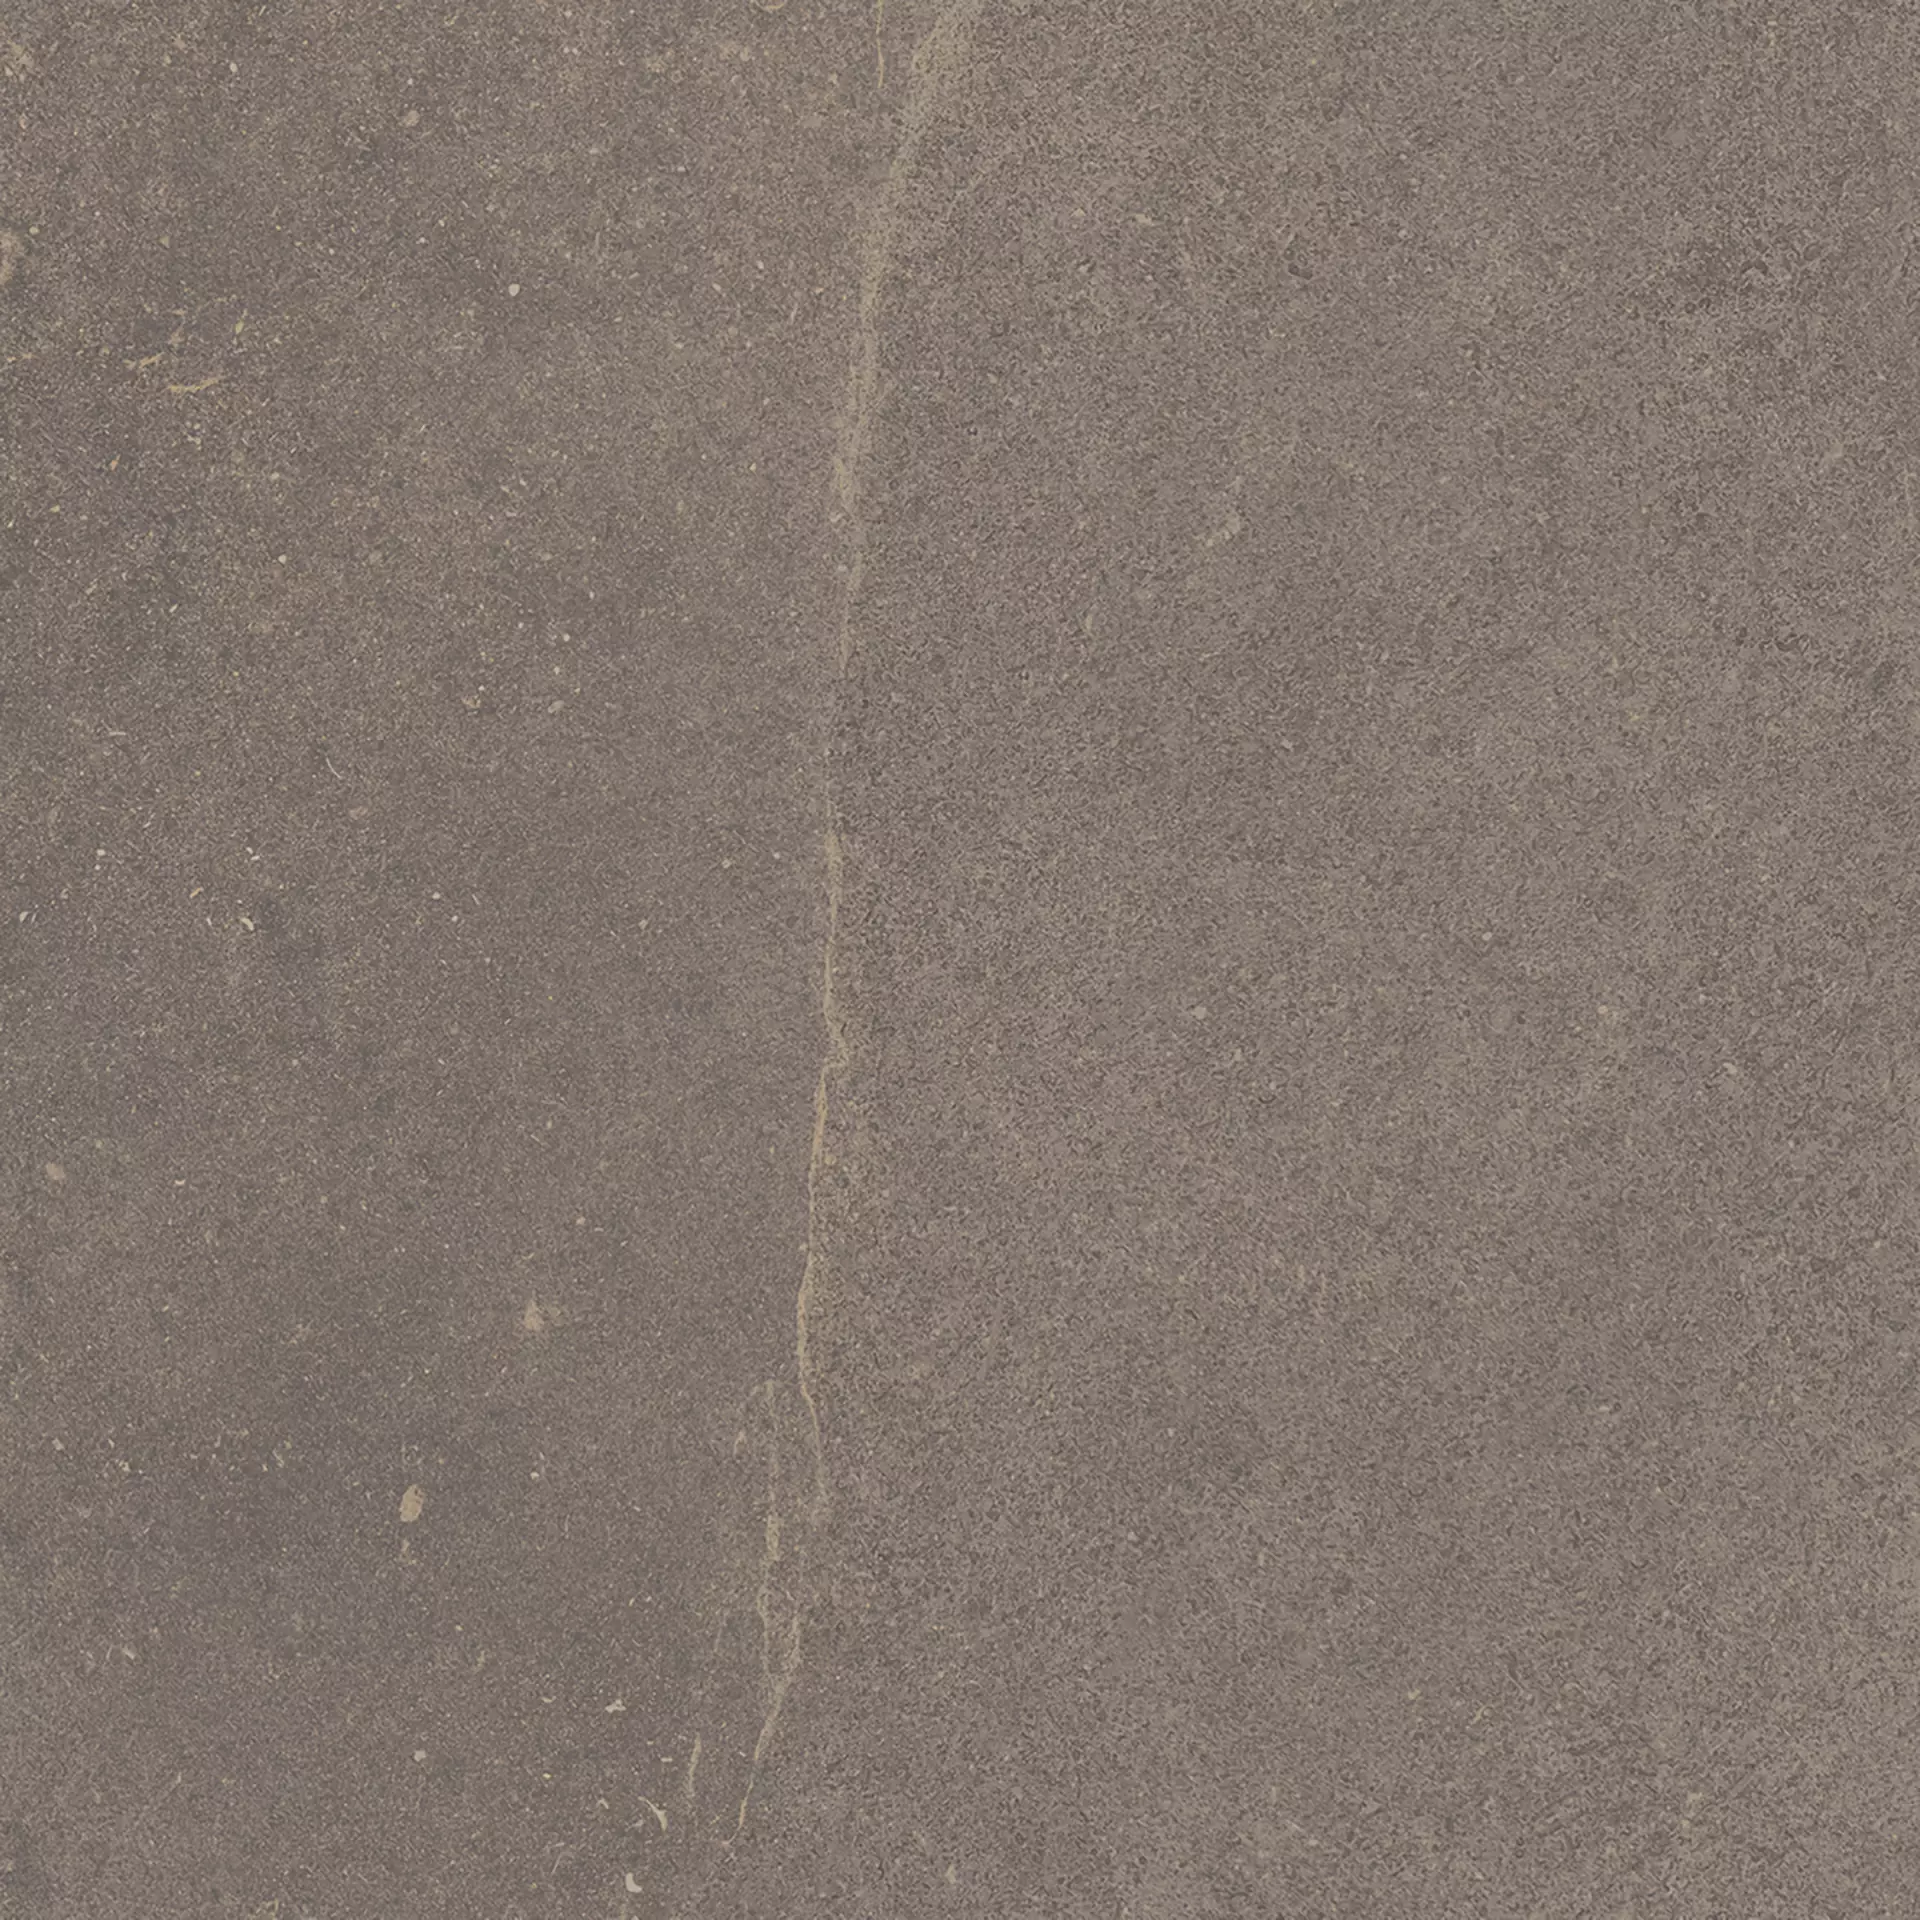 Fondovalle Planeto Mars Natural PNT284 60x60cm rectified 8,5mm